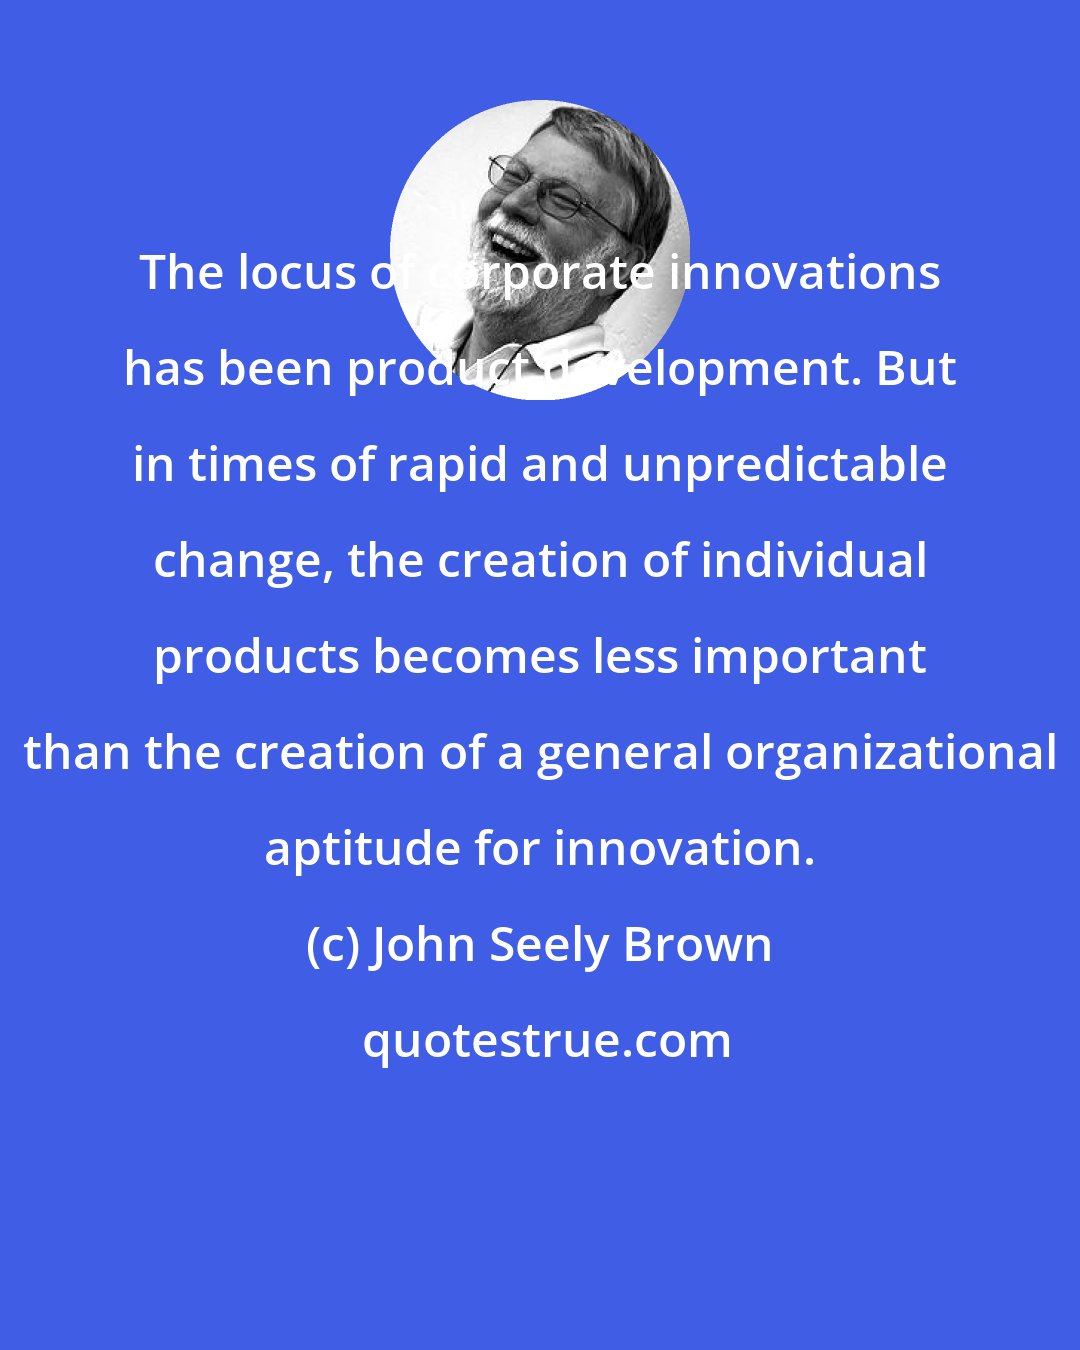 John Seely Brown: The locus of corporate innovations has been product development. But in times of rapid and unpredictable change, the creation of individual products becomes less important than the creation of a general organizational aptitude for innovation.